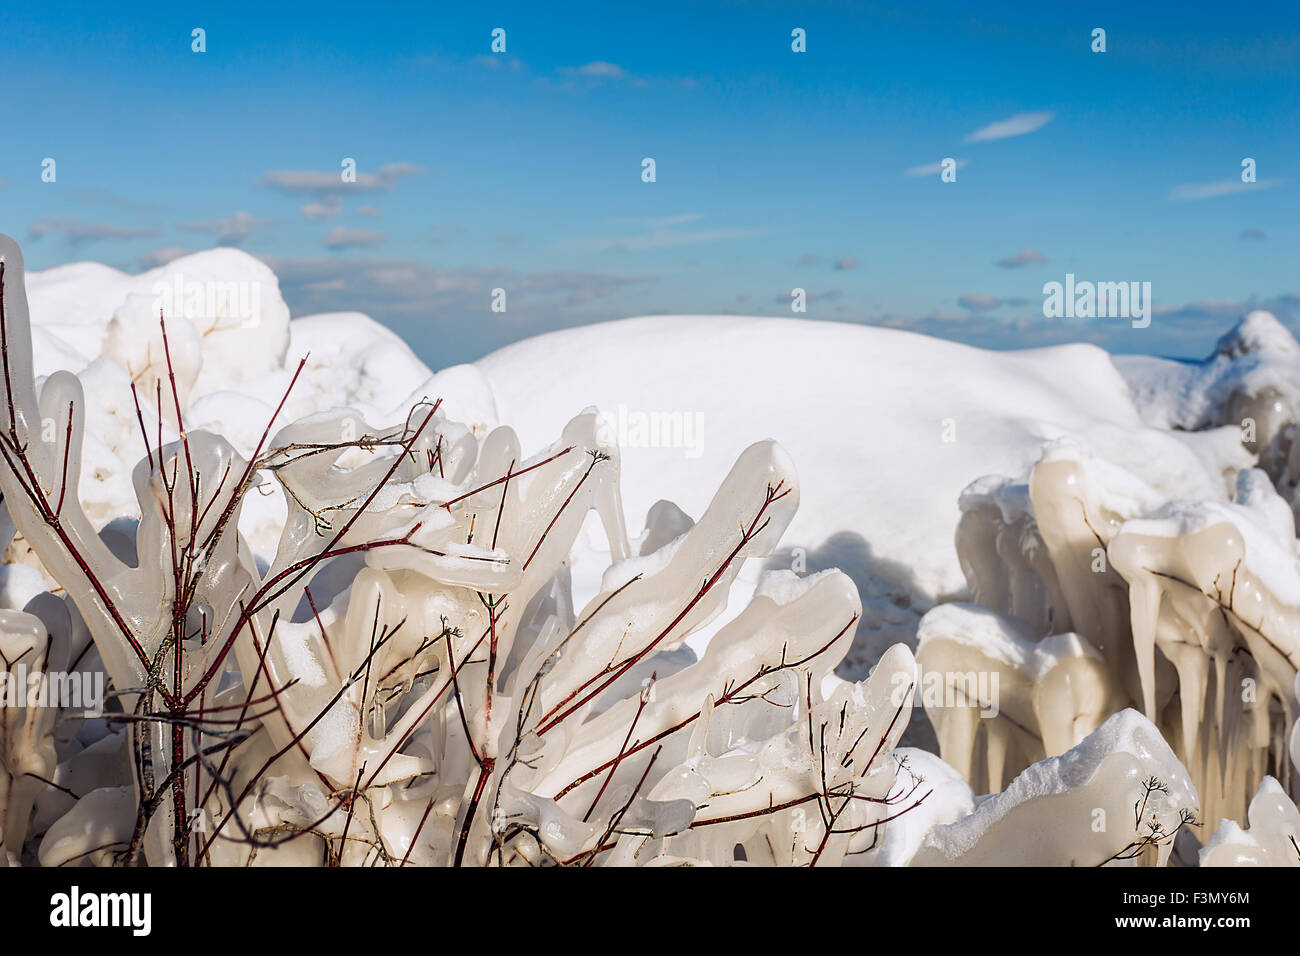 Ice and snow by Lake Ontario in Toronto. Stock Photo